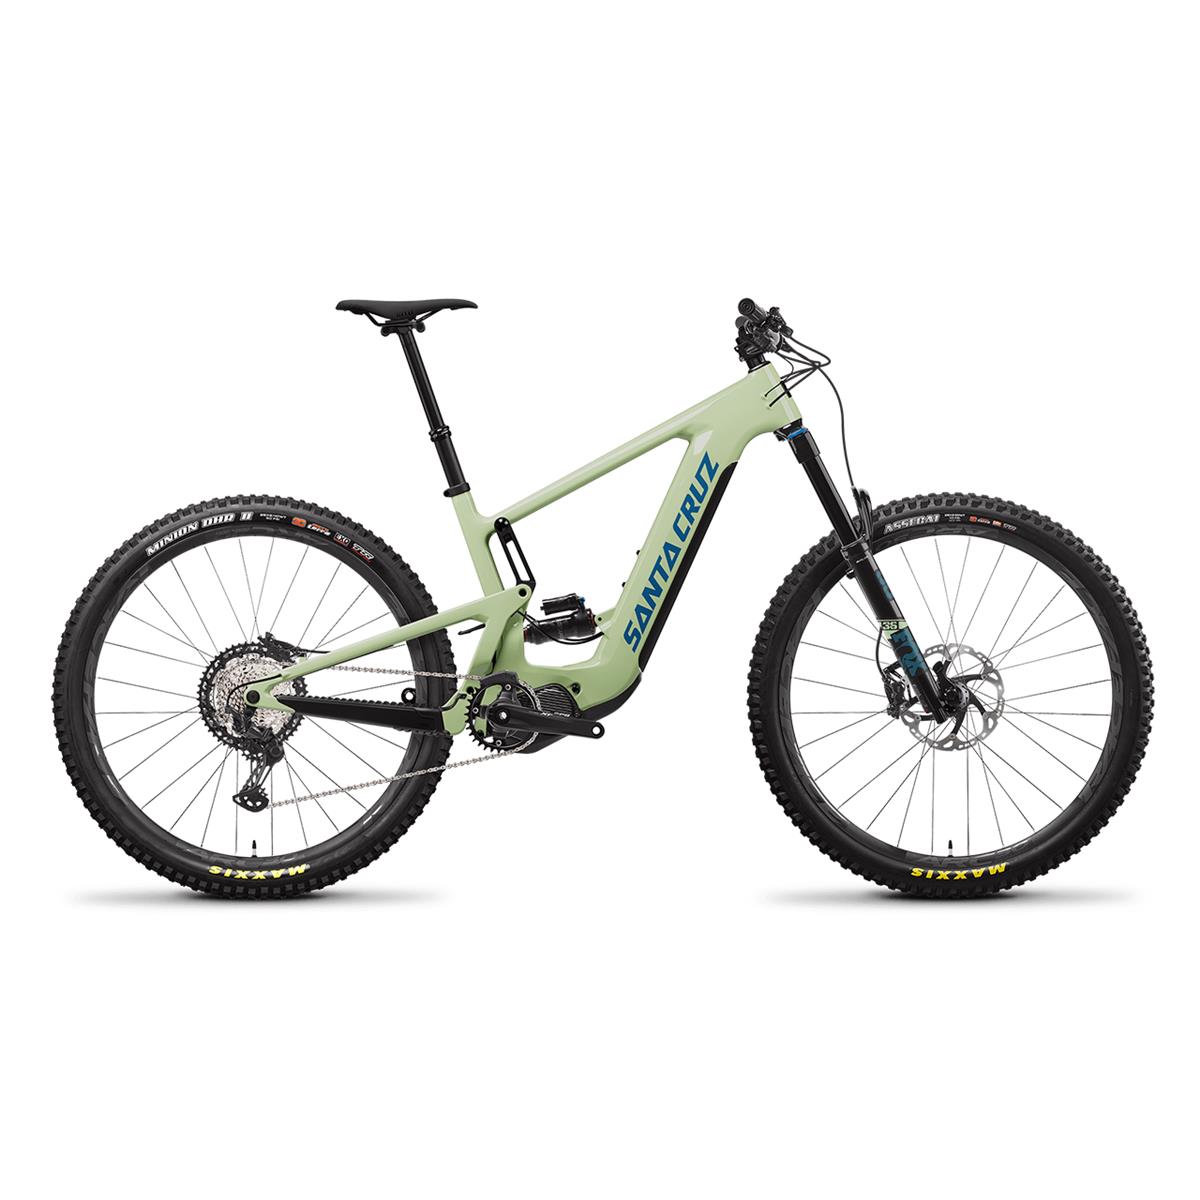 Heckler 9 C XT MX 29/27.5'' 160mm 12s 720Wh Shimano EP8 Verde Aguacate 2023 Talla M